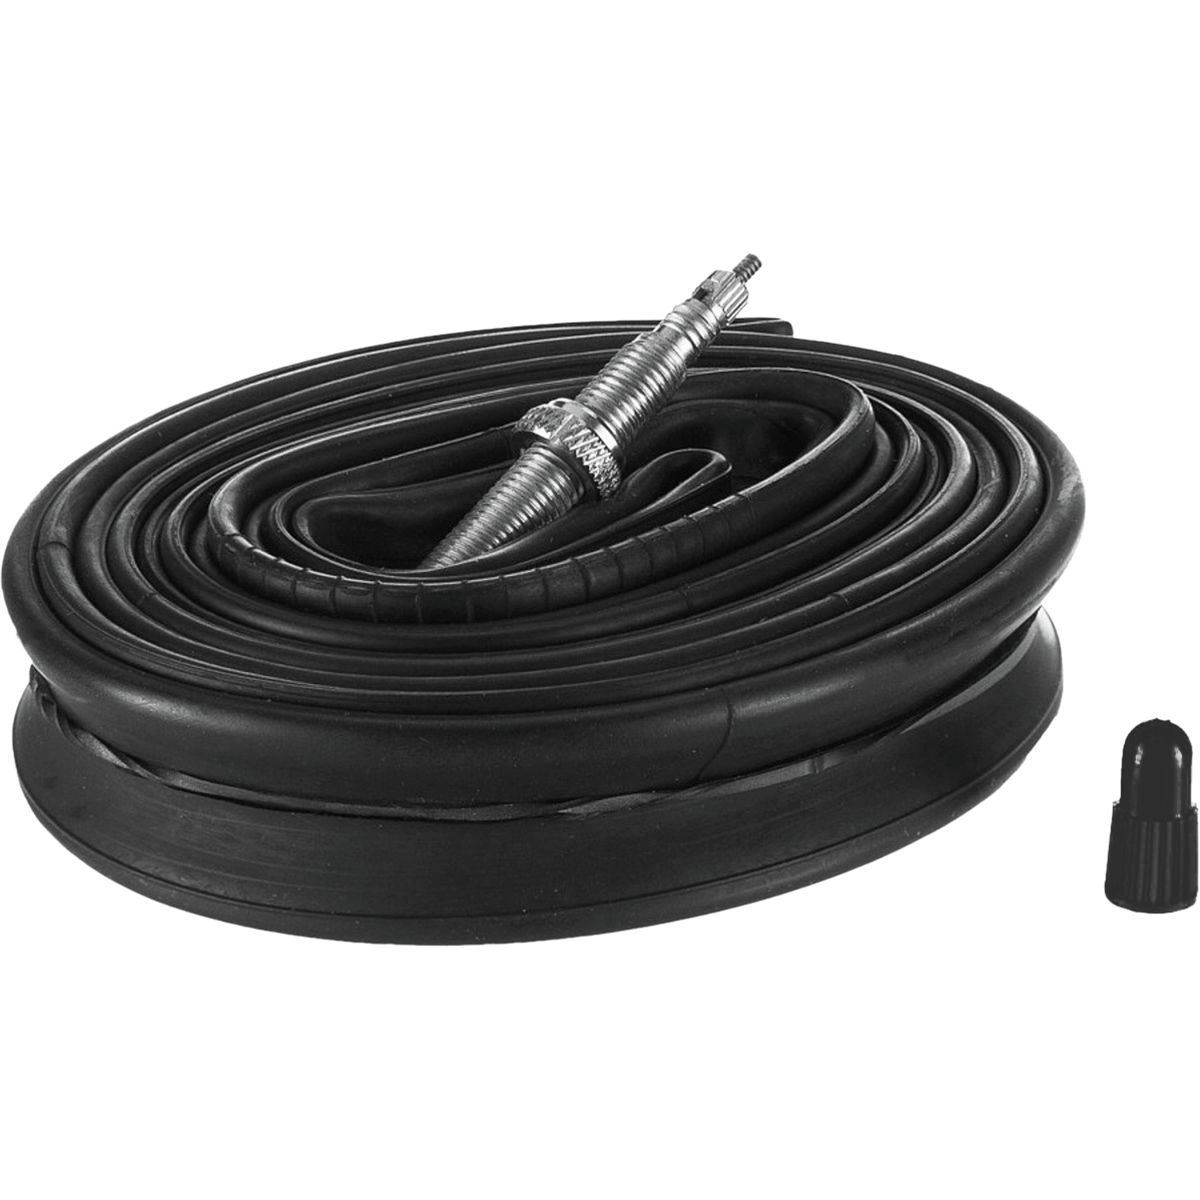 Continental Cycling Race 28 Inner Tube